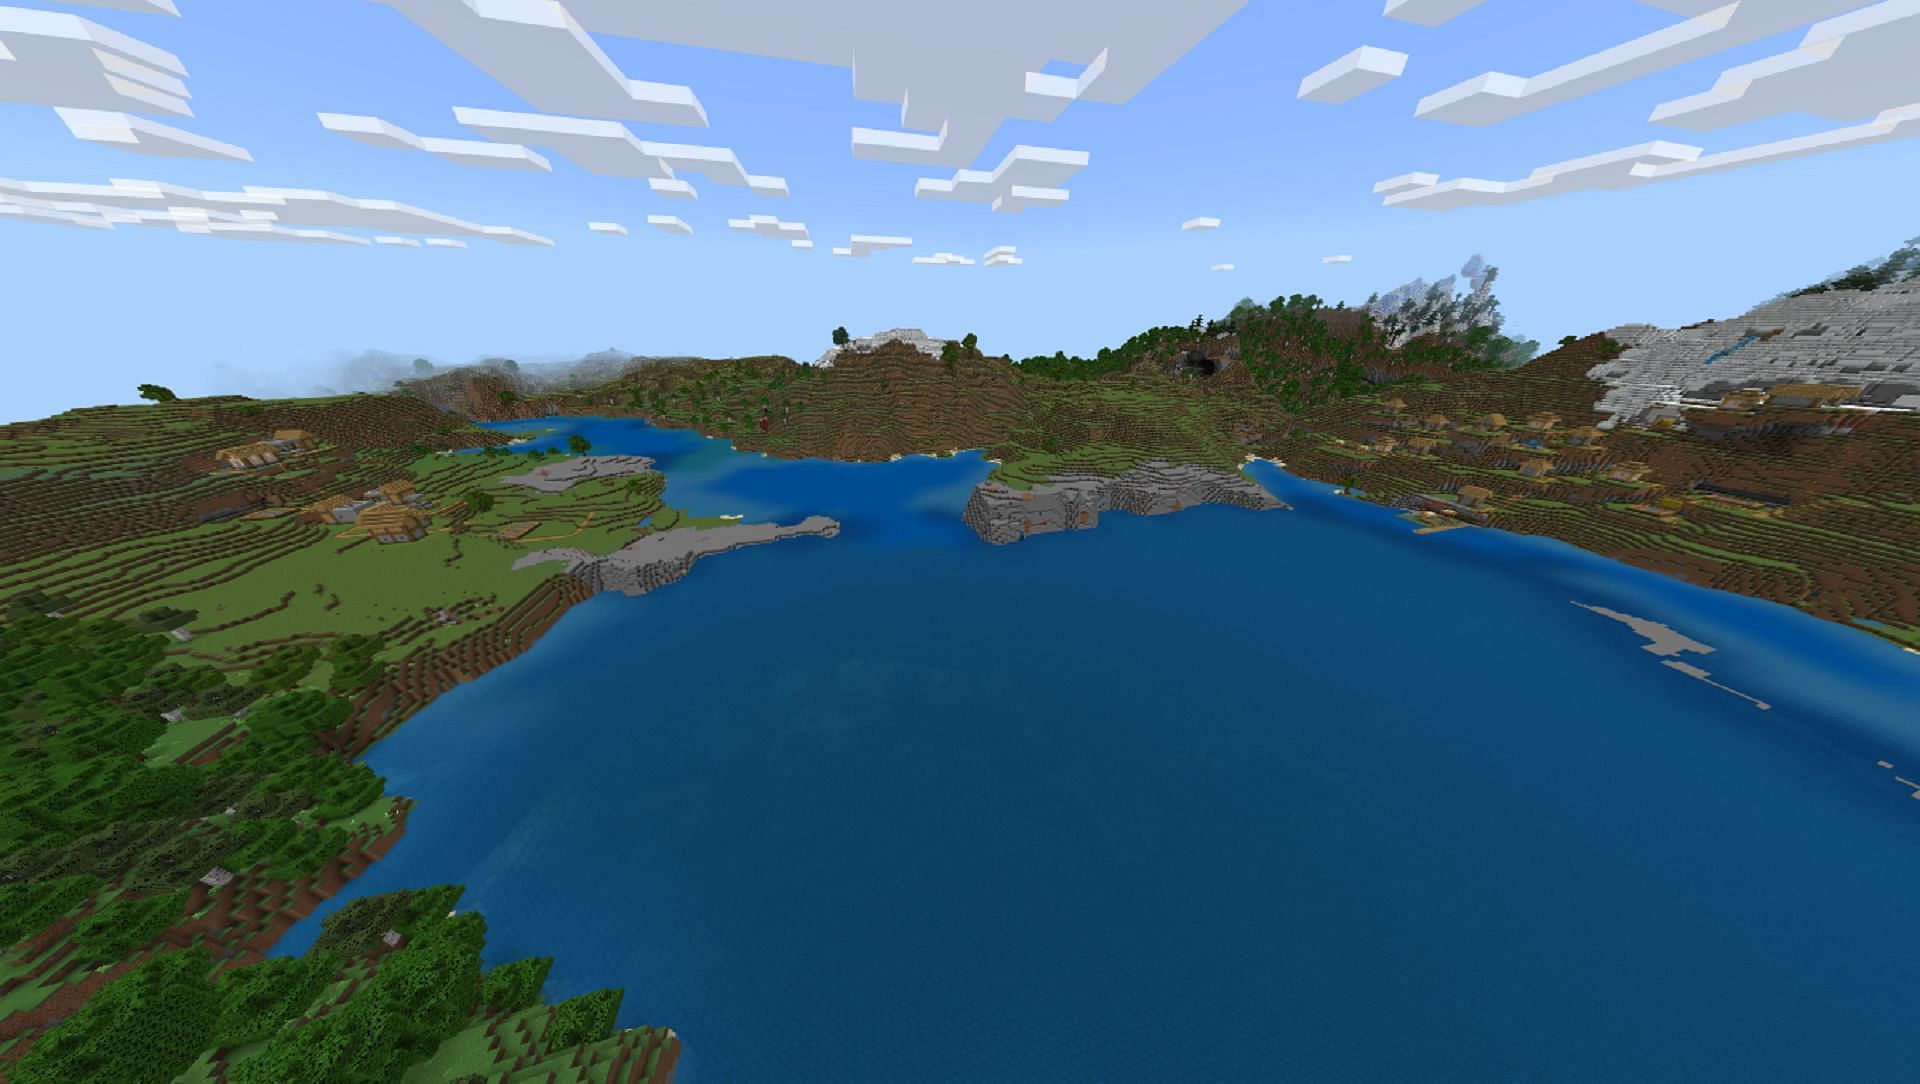 Two villages await players in this Minecraft seed, complete with a central lake (Image via Mojang)